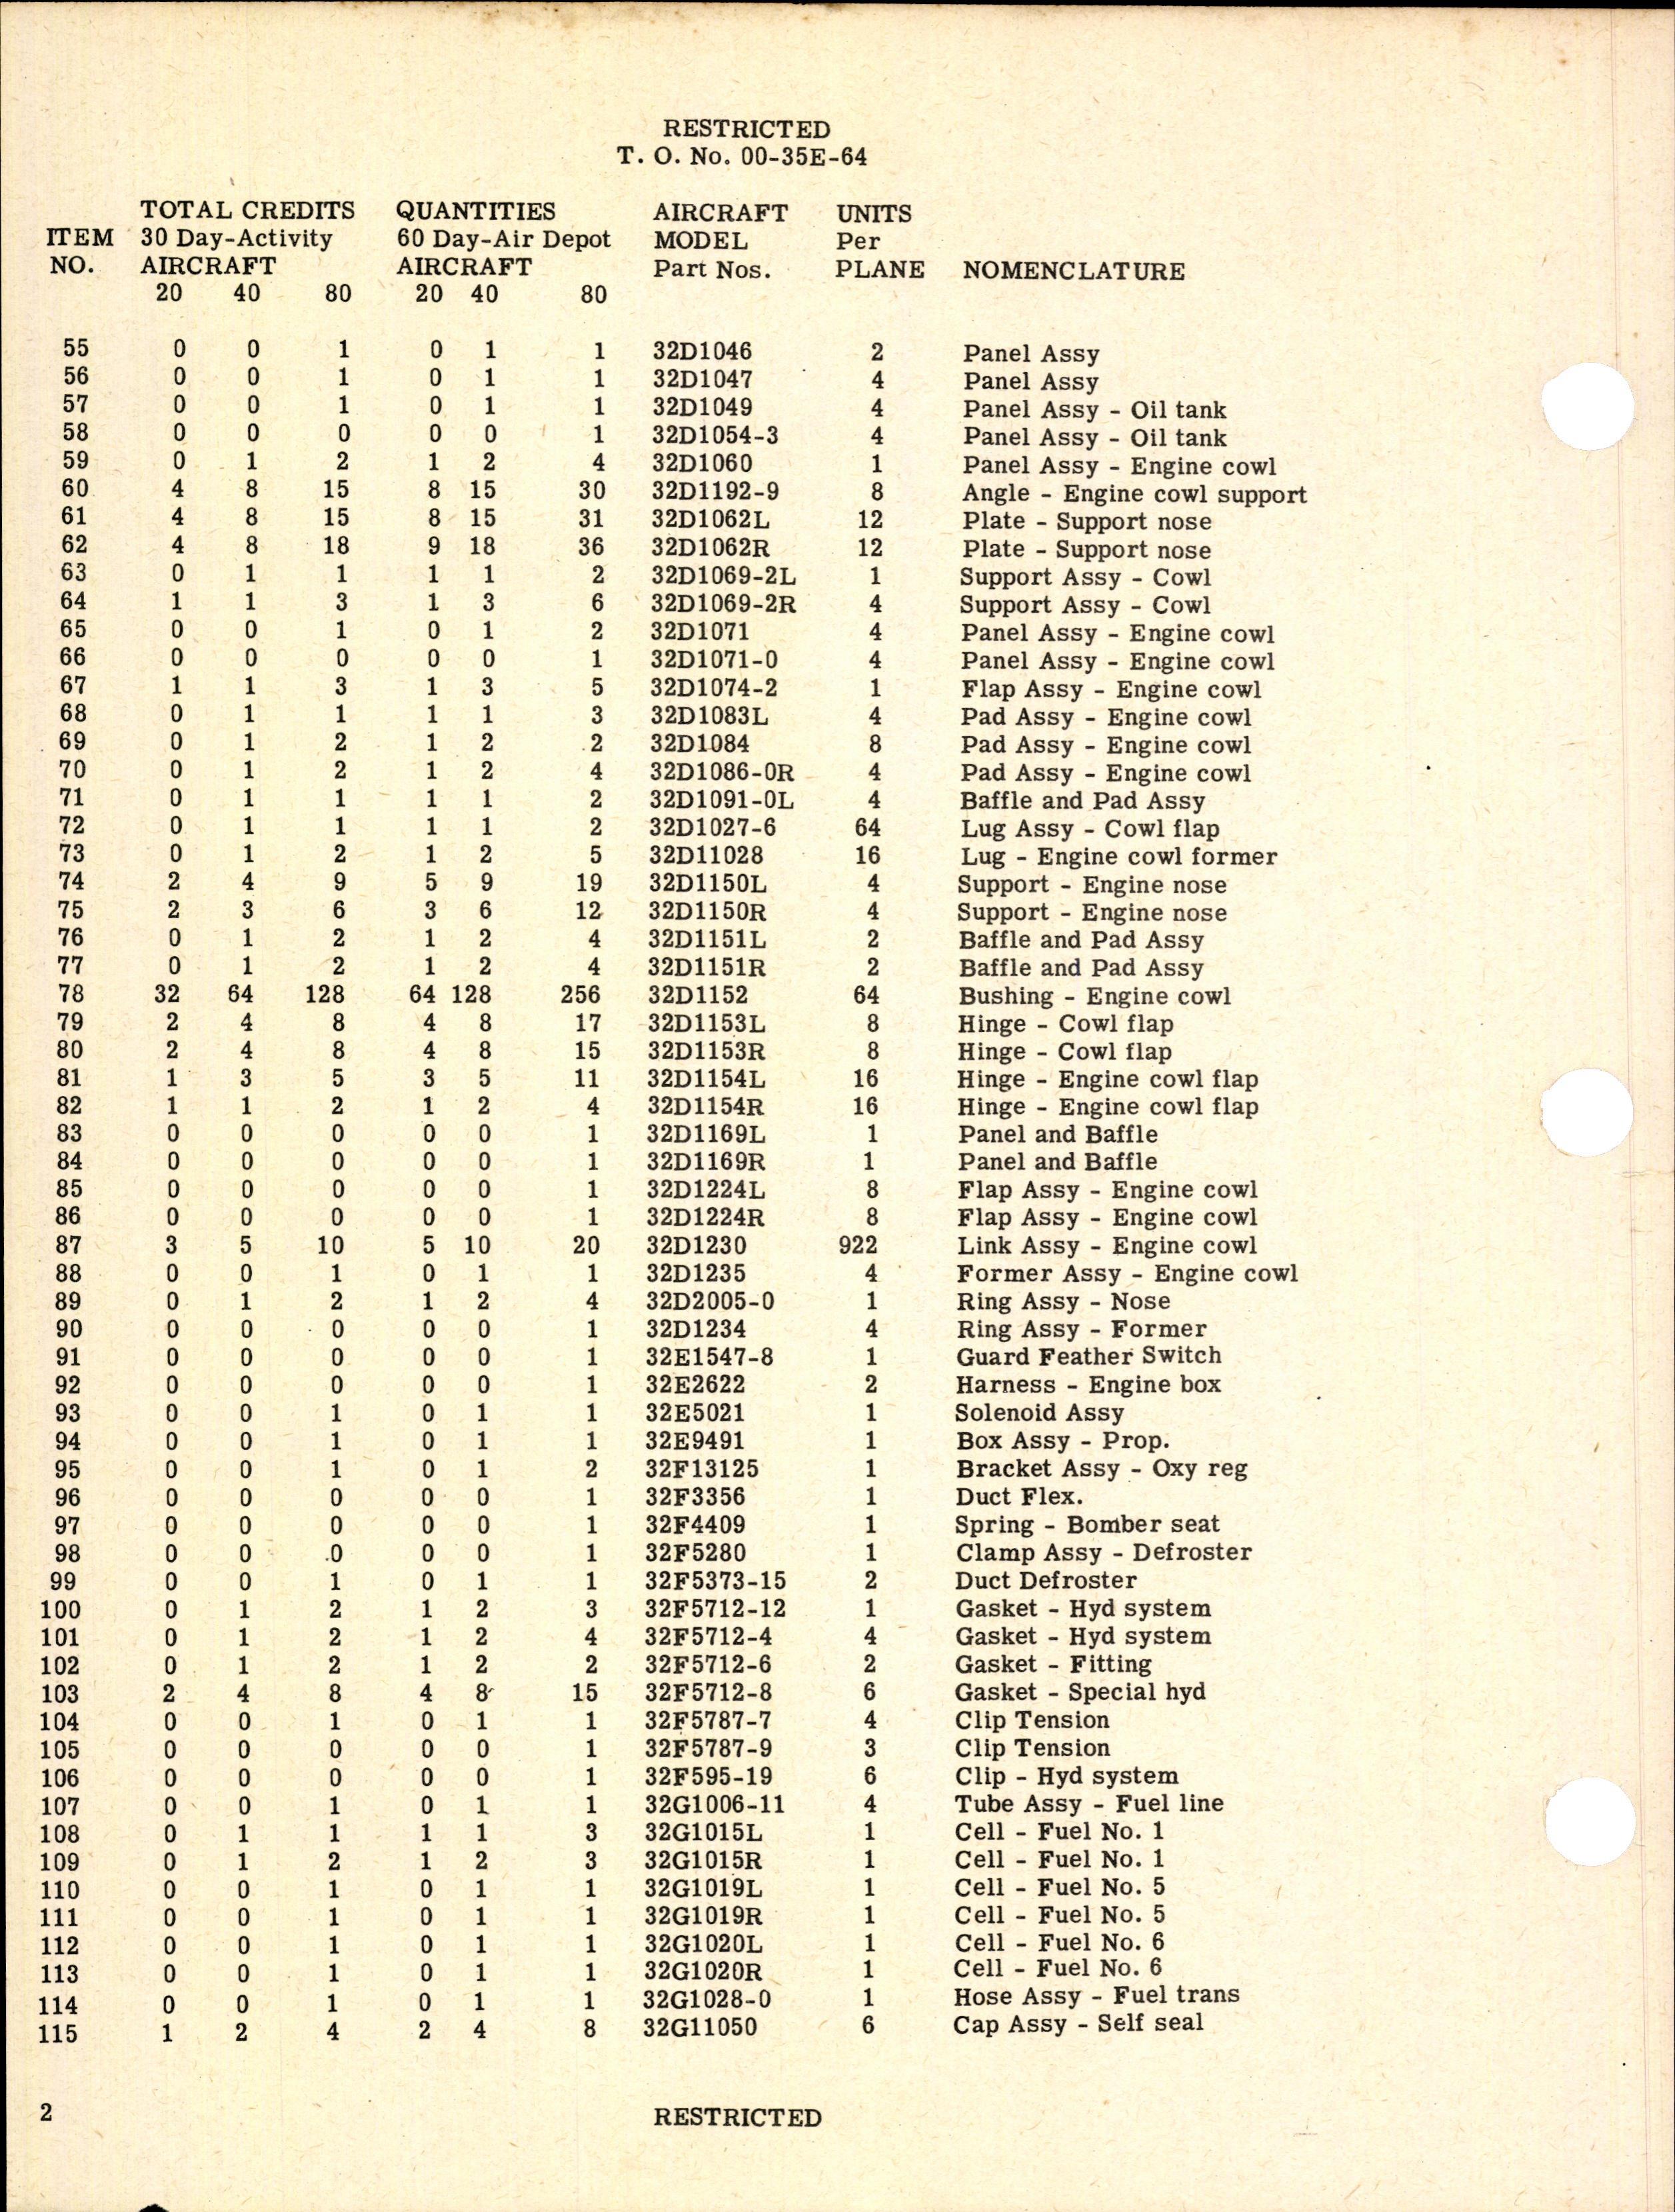 Sample page 4 from AirCorps Library document: Table of Credit Aircraft Maintenance Parts for RB-24E Aircraft